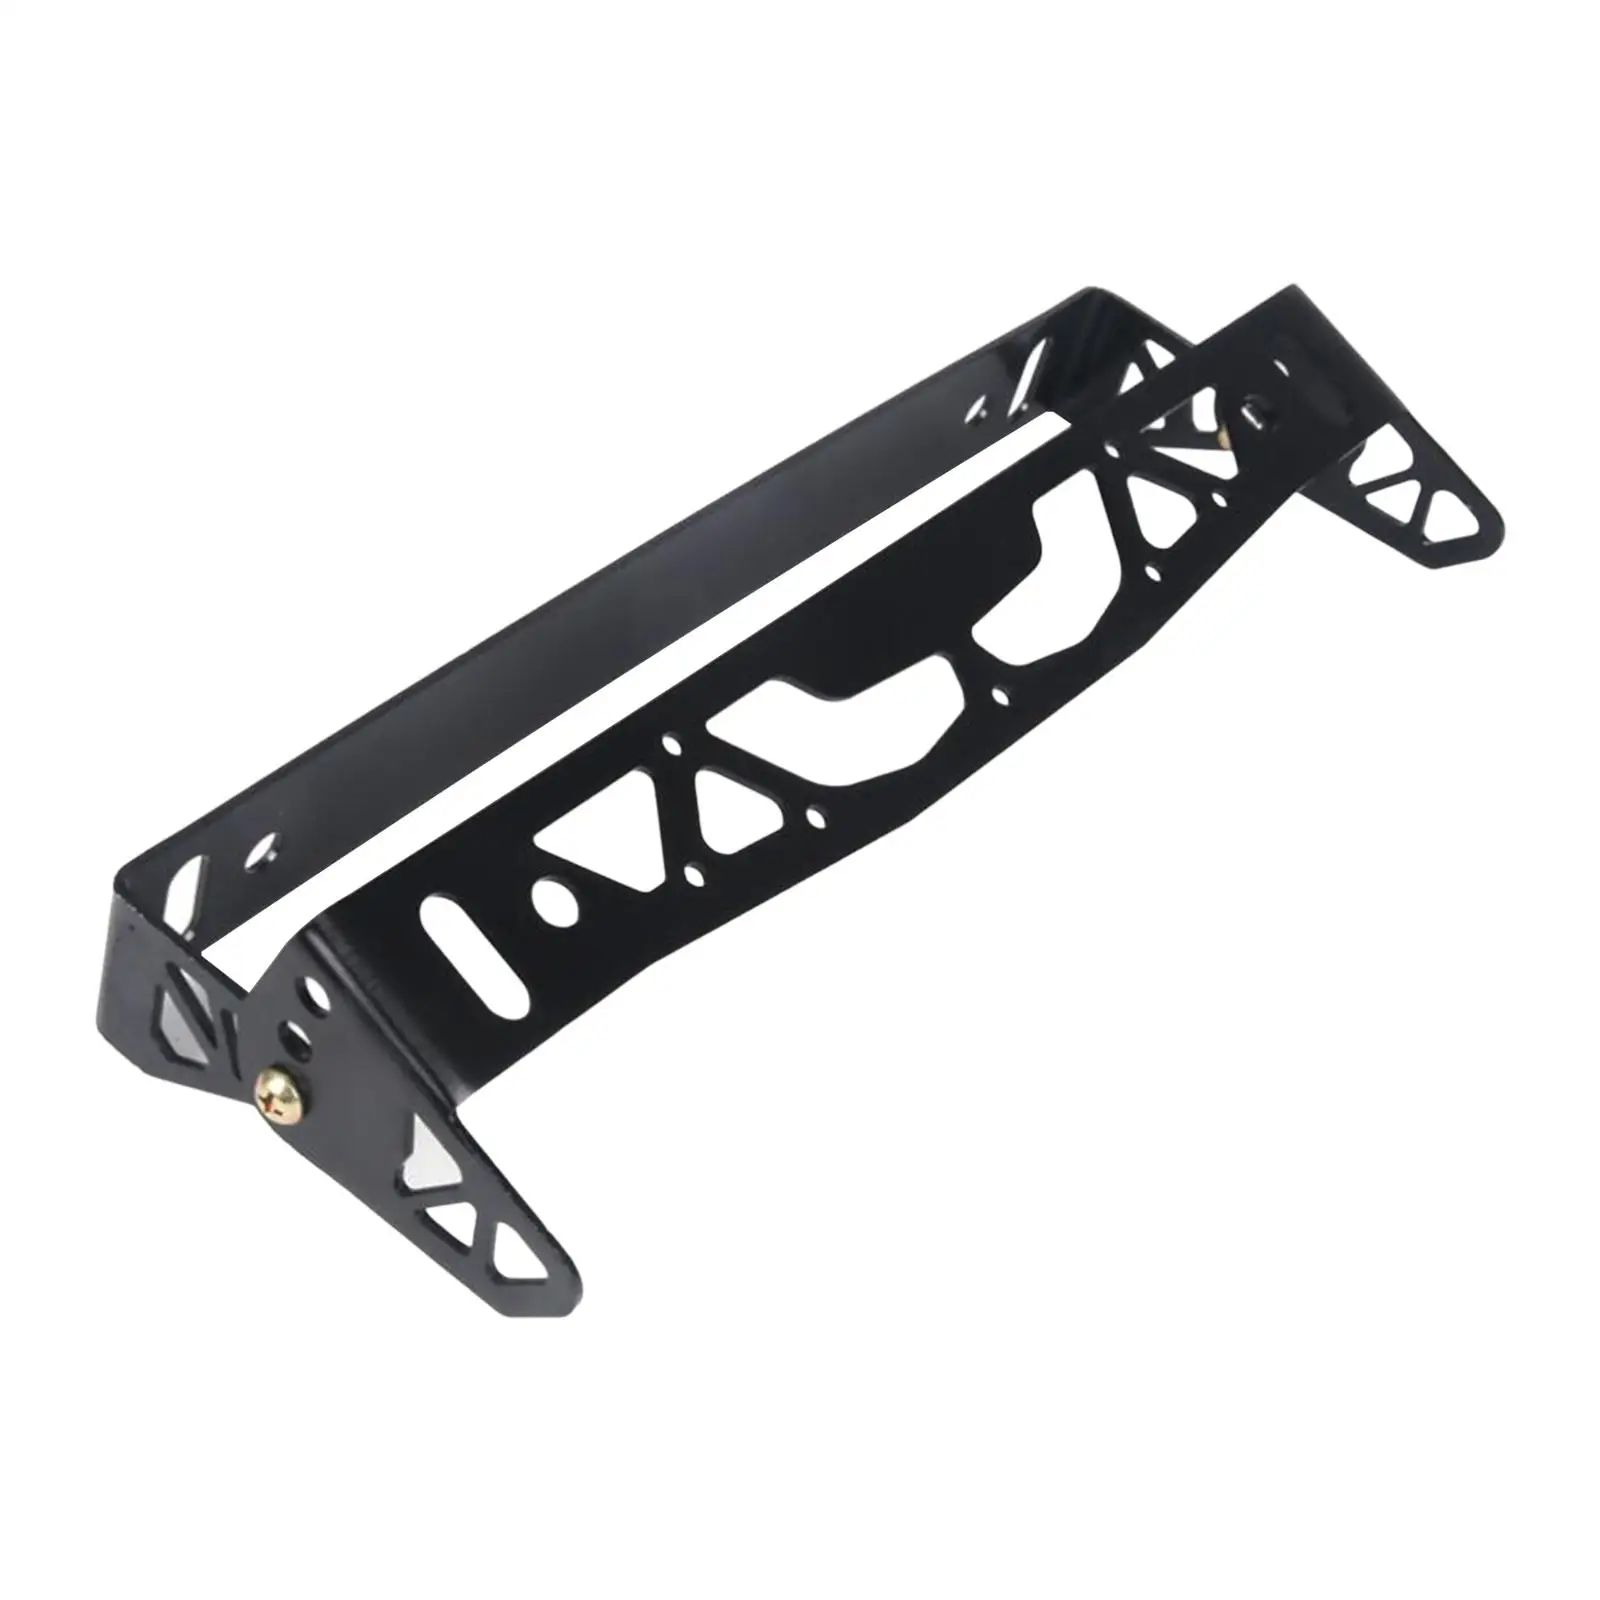 License Plate Frame Holder Auto Parts Aluminum Alloy Easy Installation Replaces Adjustable Car Front License Plate Mount